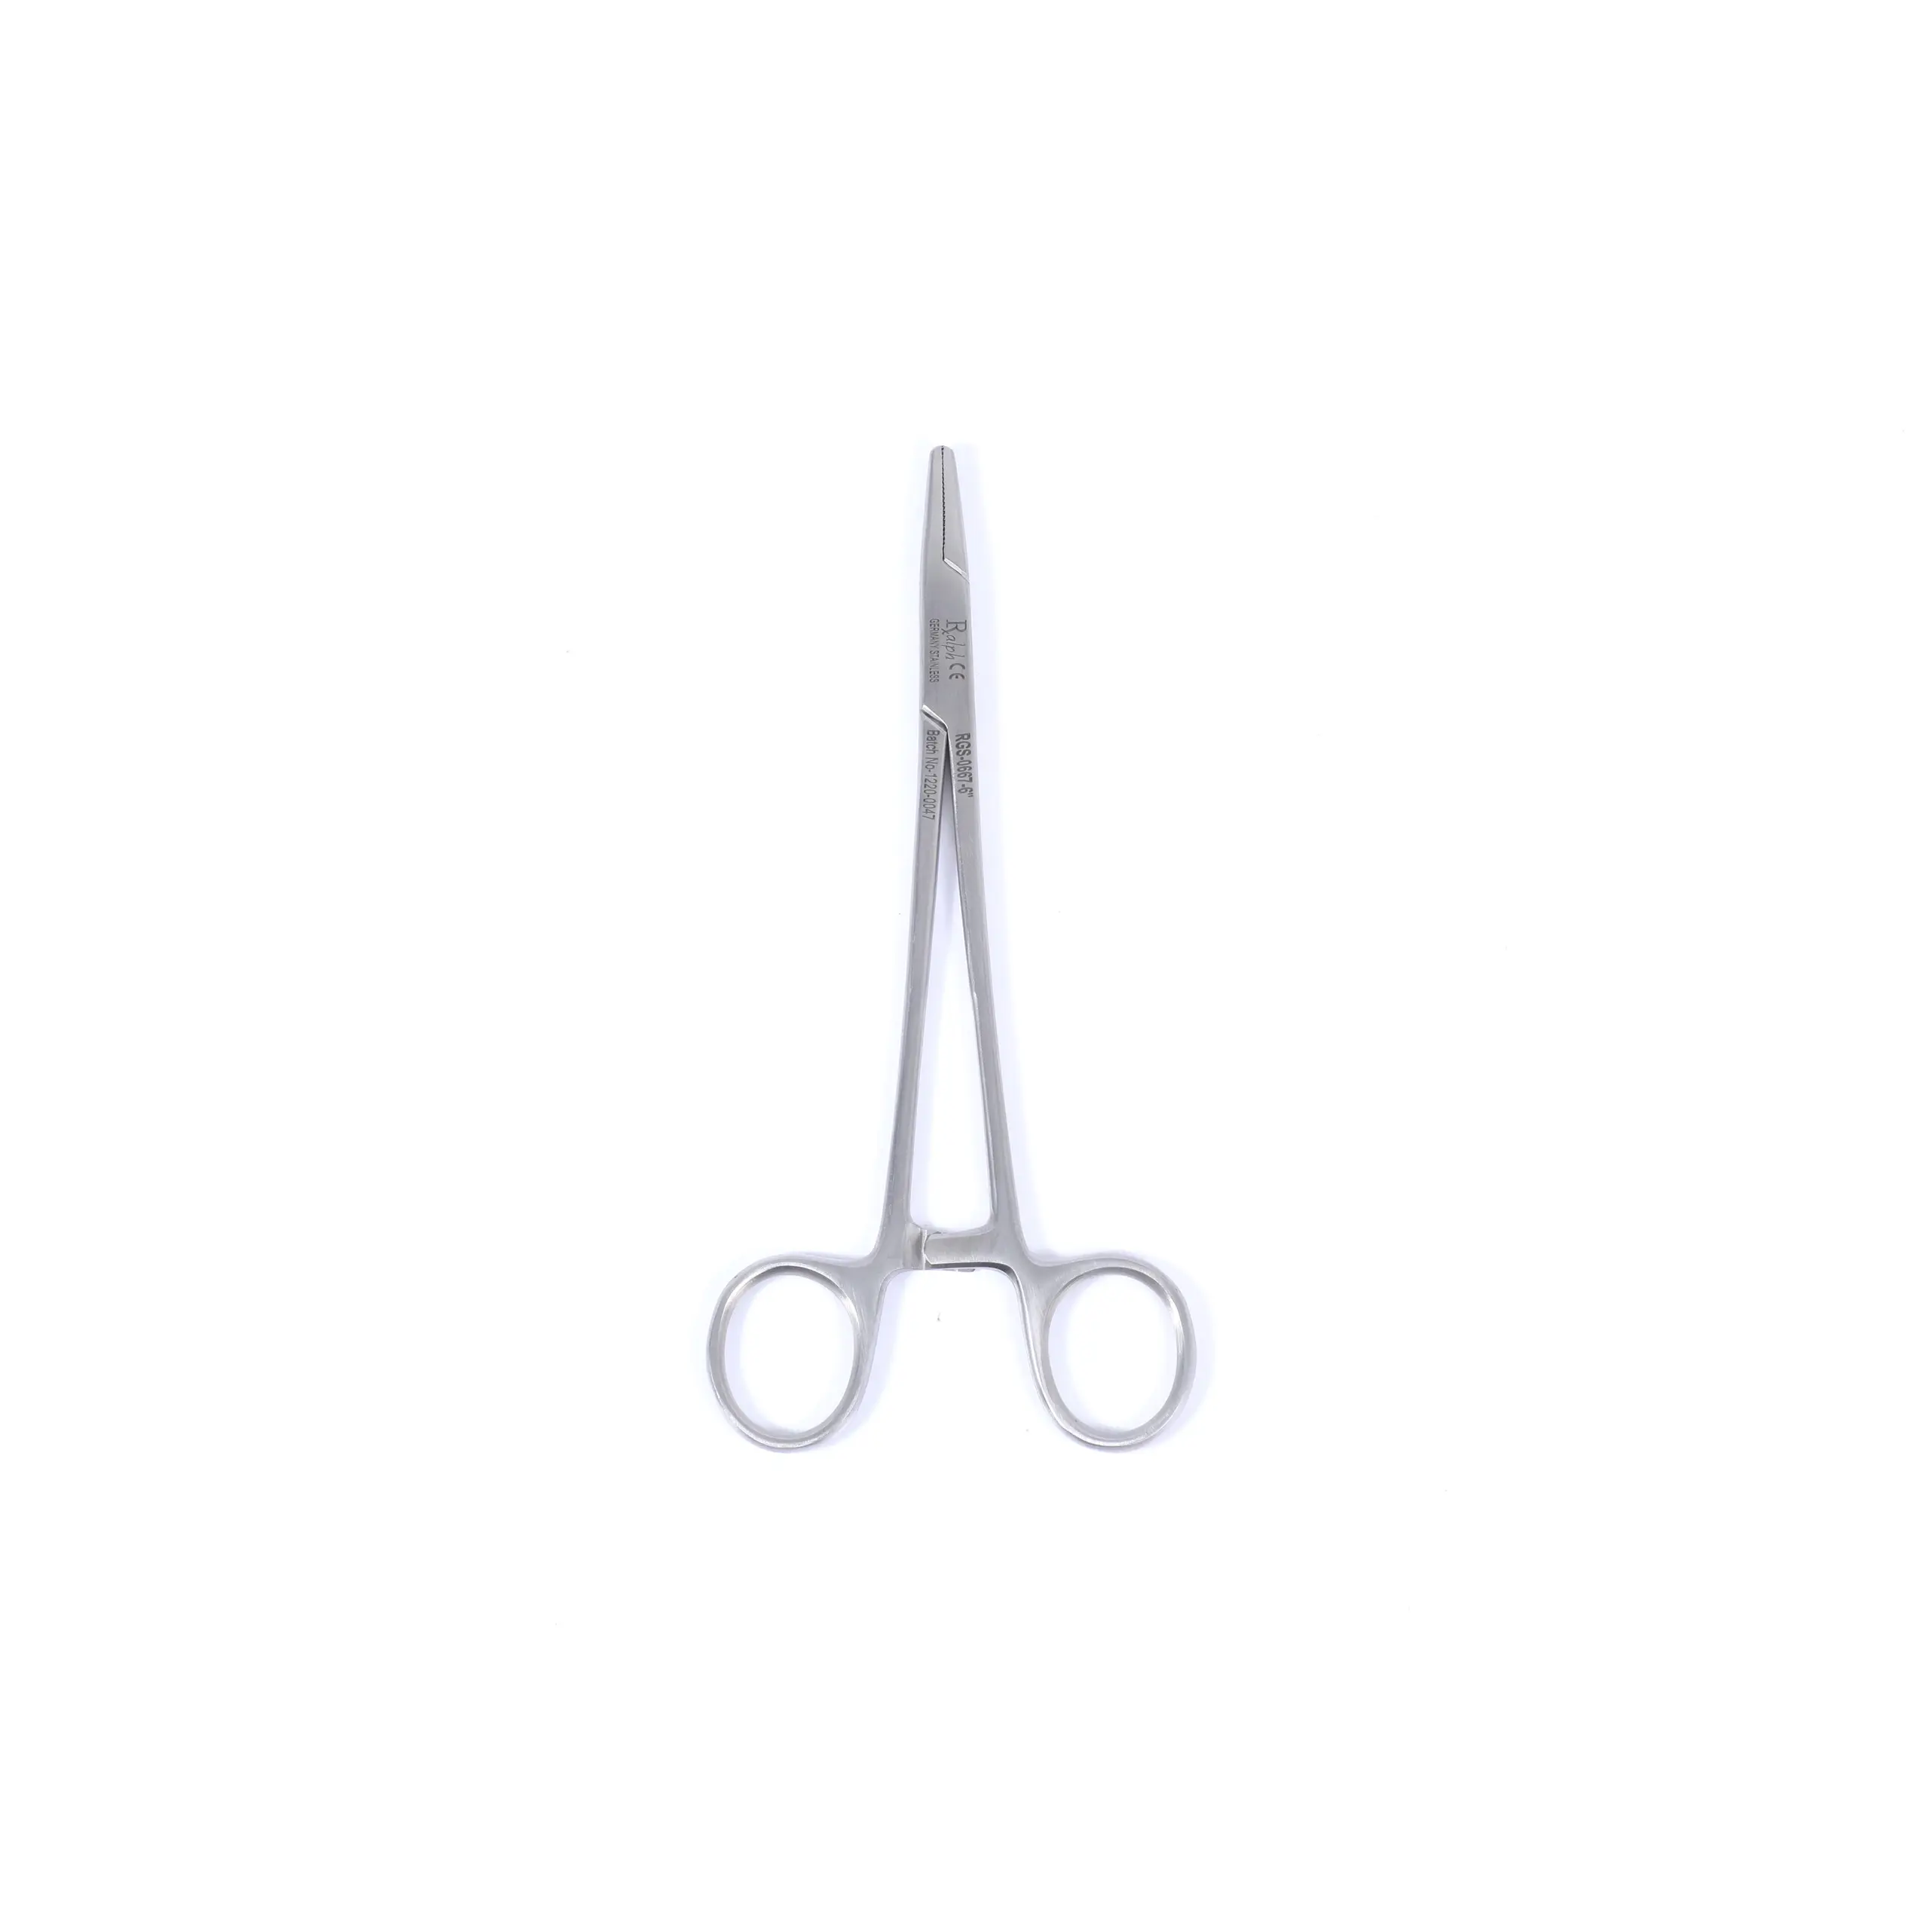 Best Selling Versatile Mayo Hegar Needle Holder For Medical Use Available At Affordable Price From Indian Exporter